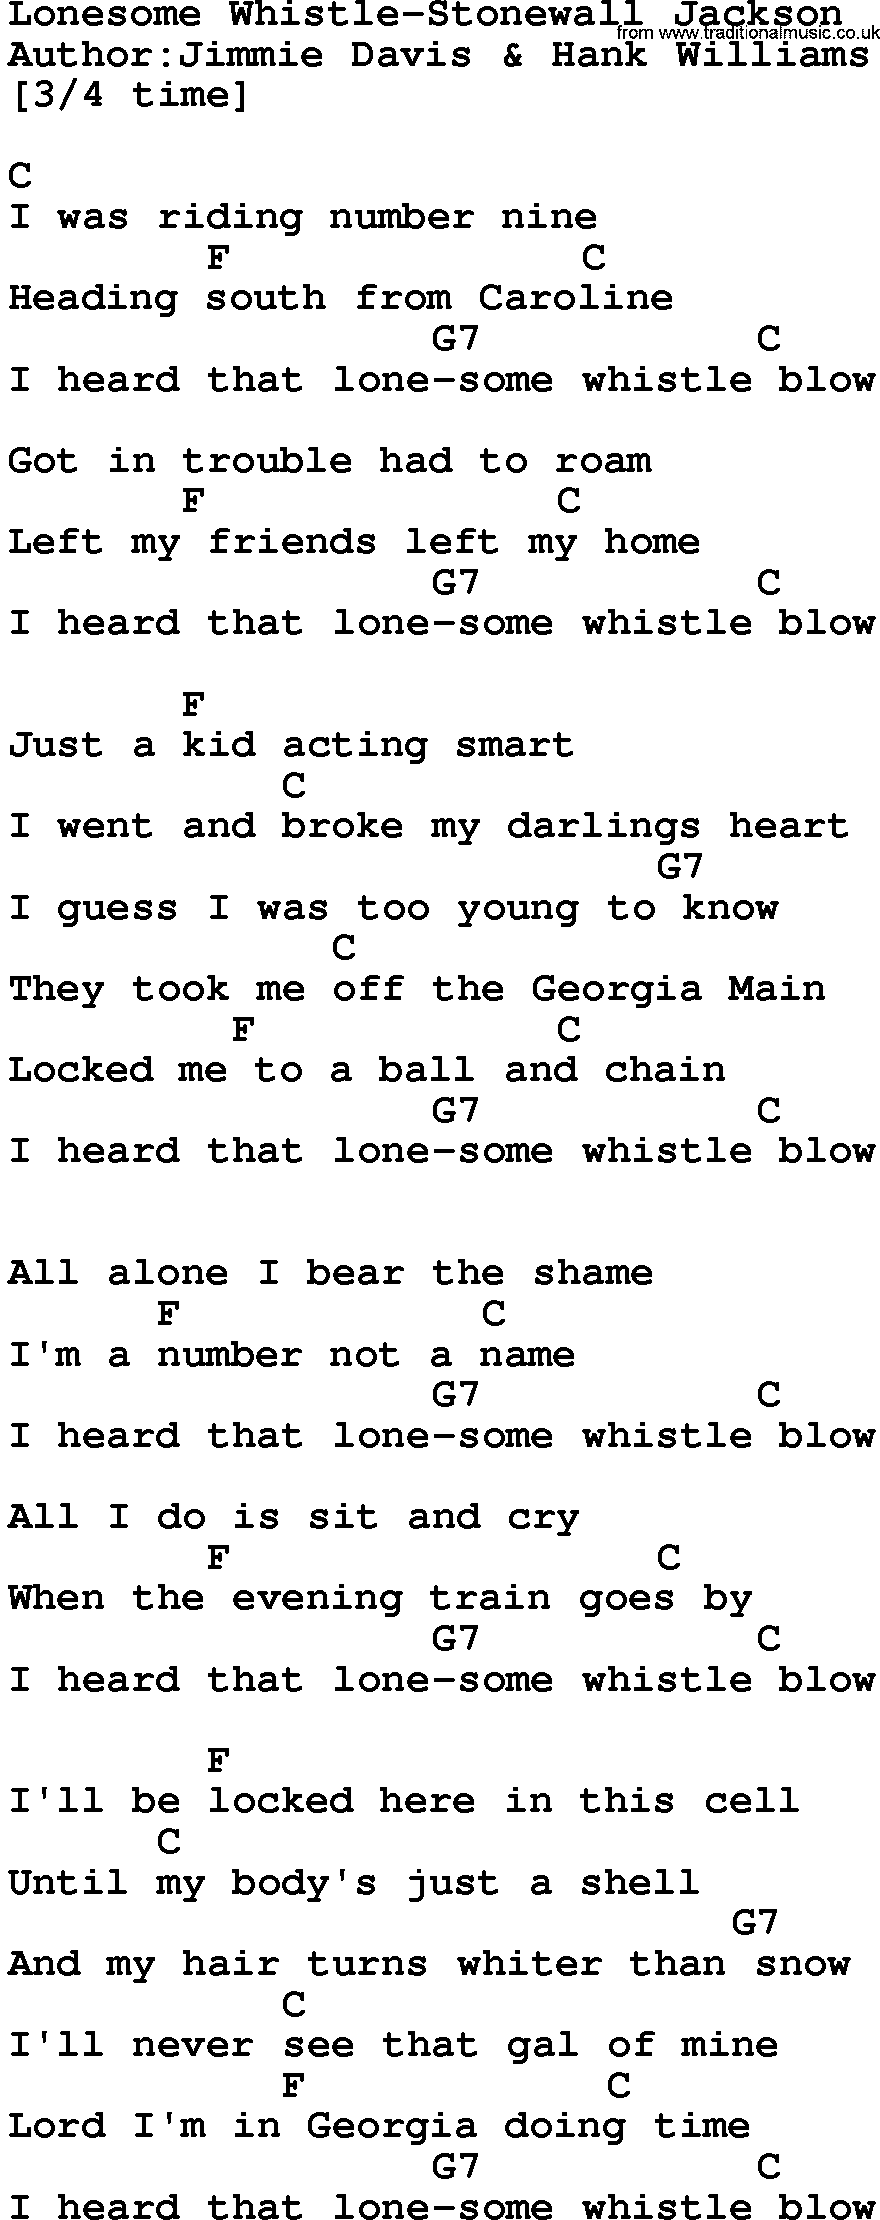 Country music song: Lonesome Whistle-Stonewall Jackson lyrics and chords